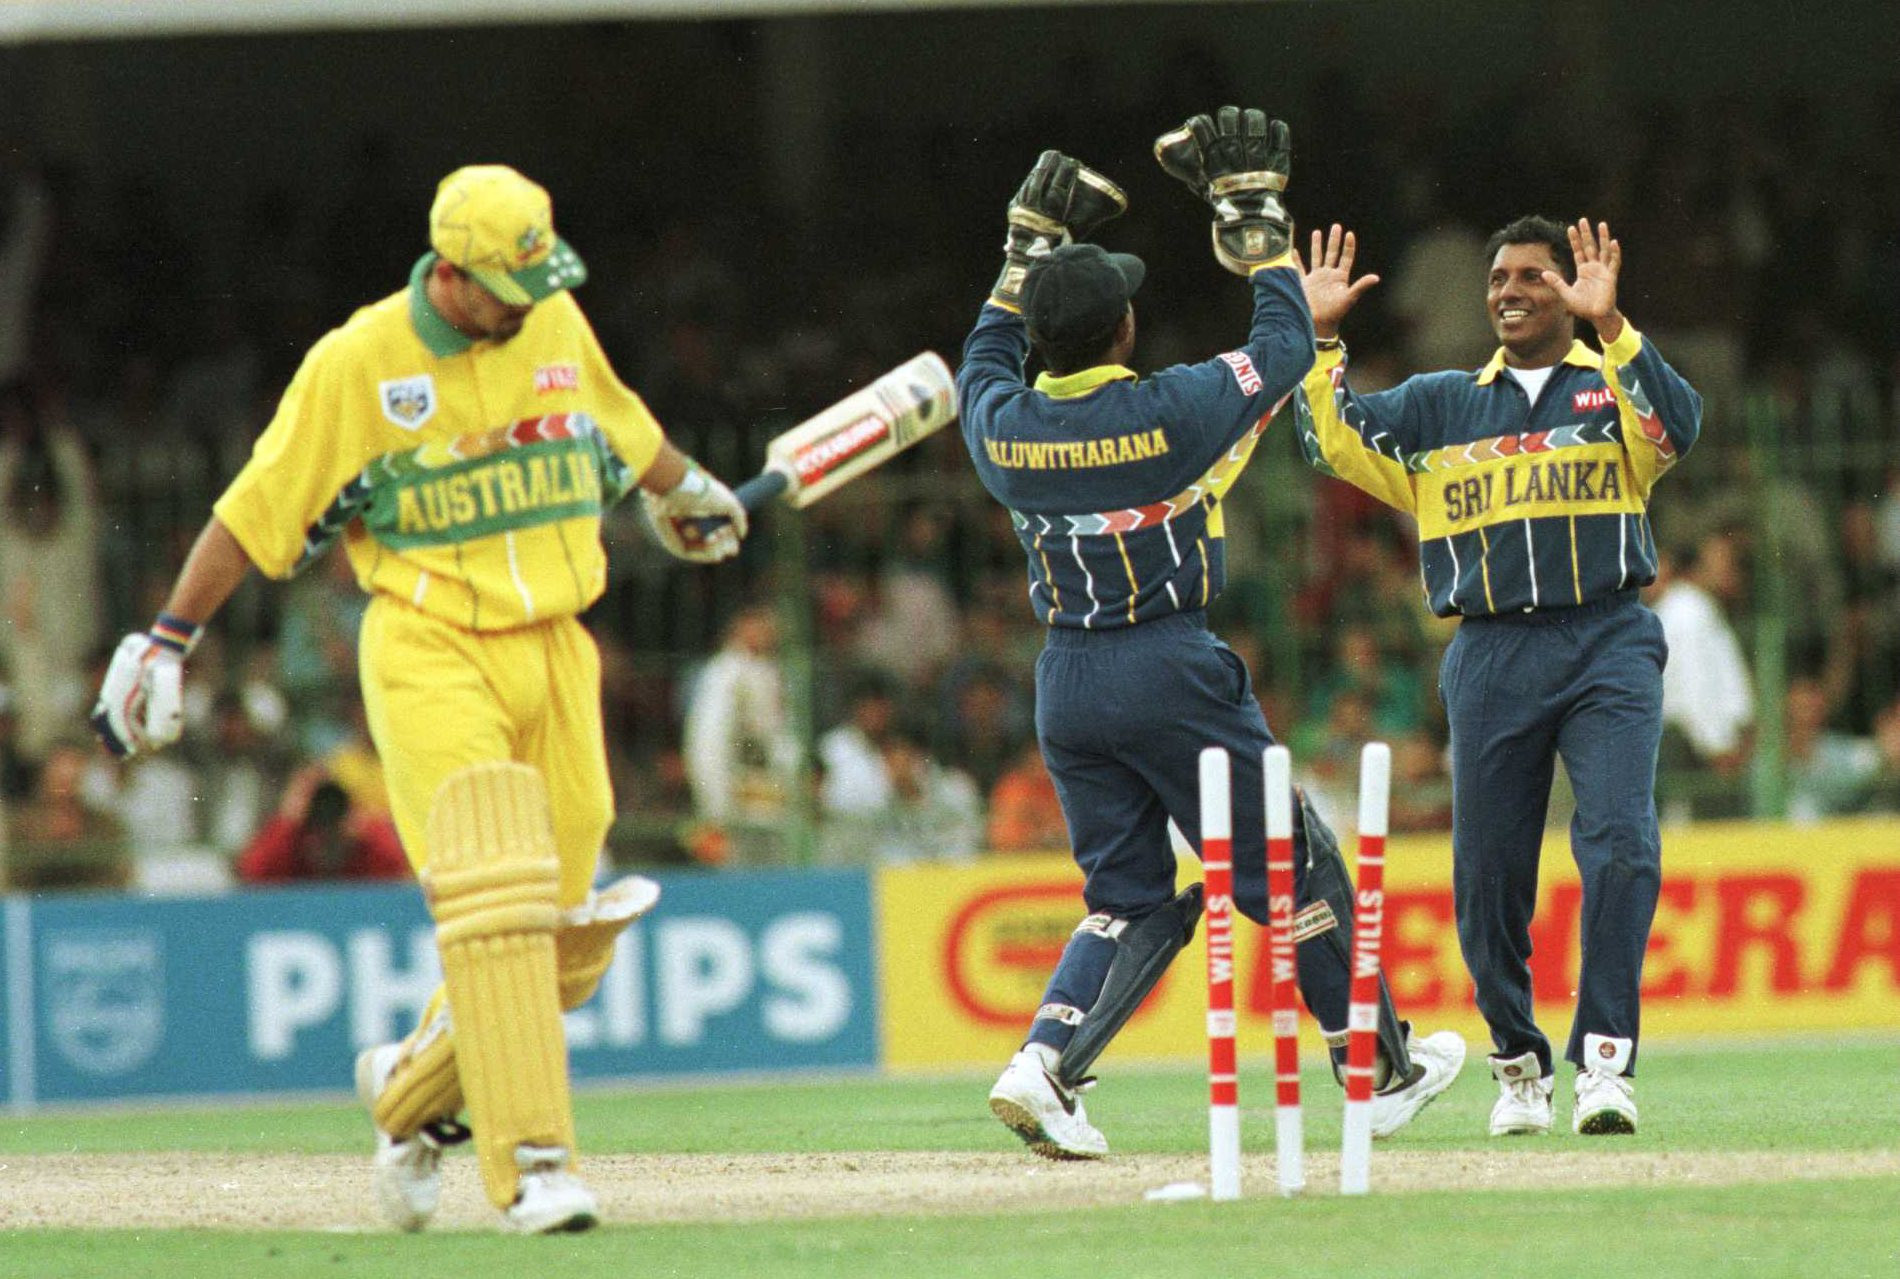 Sri Lanka defeated Australia in the 1996 World Cup final ©Getty Images